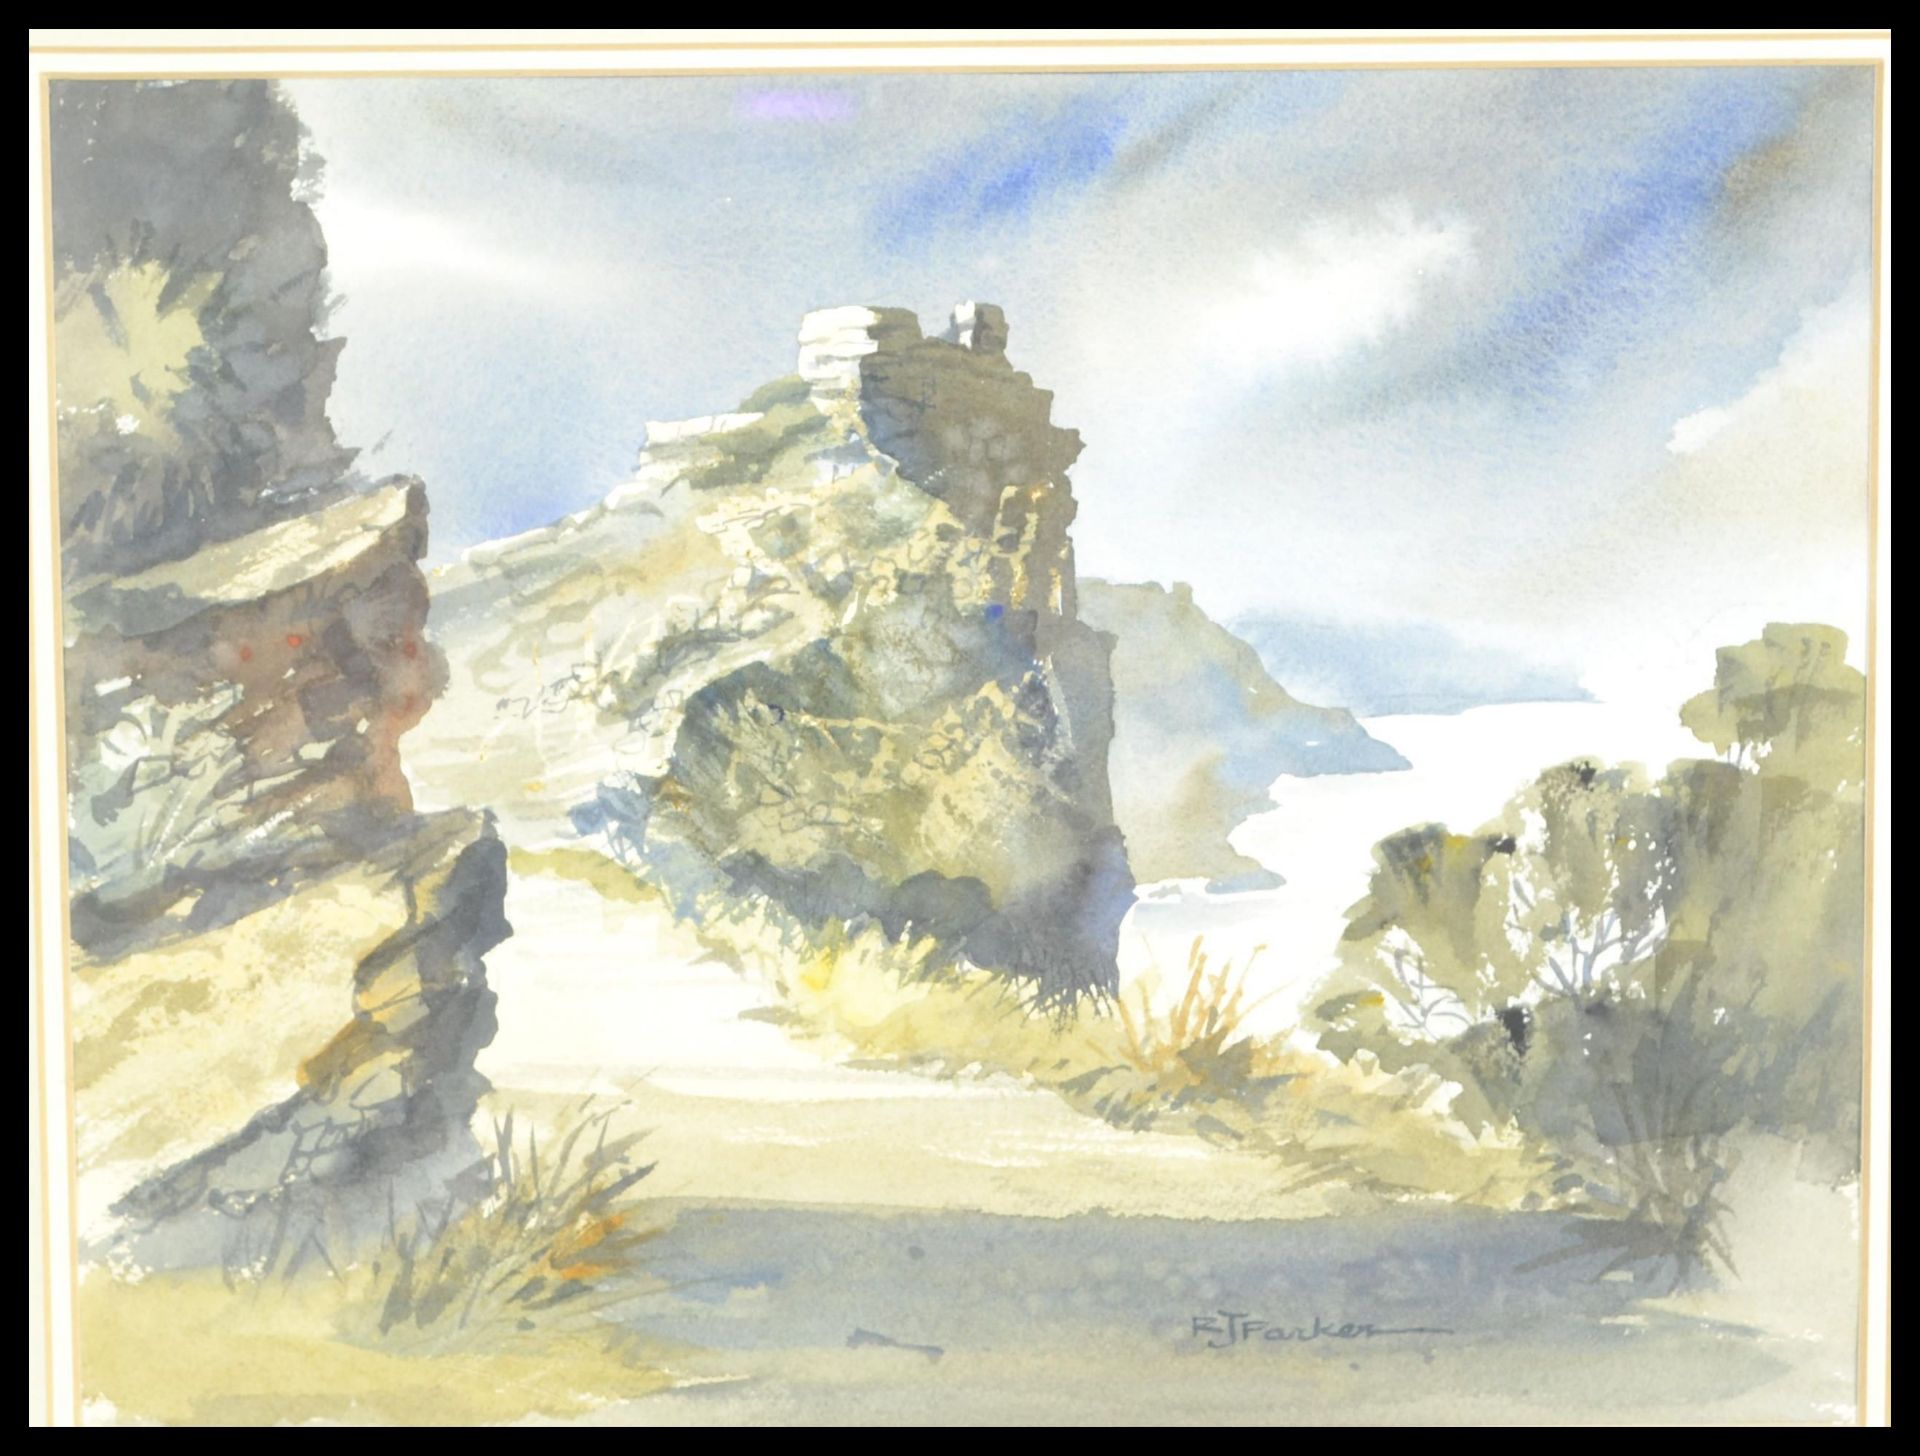 R J Parker (20th Century) - A watercolour painting - Image 2 of 4